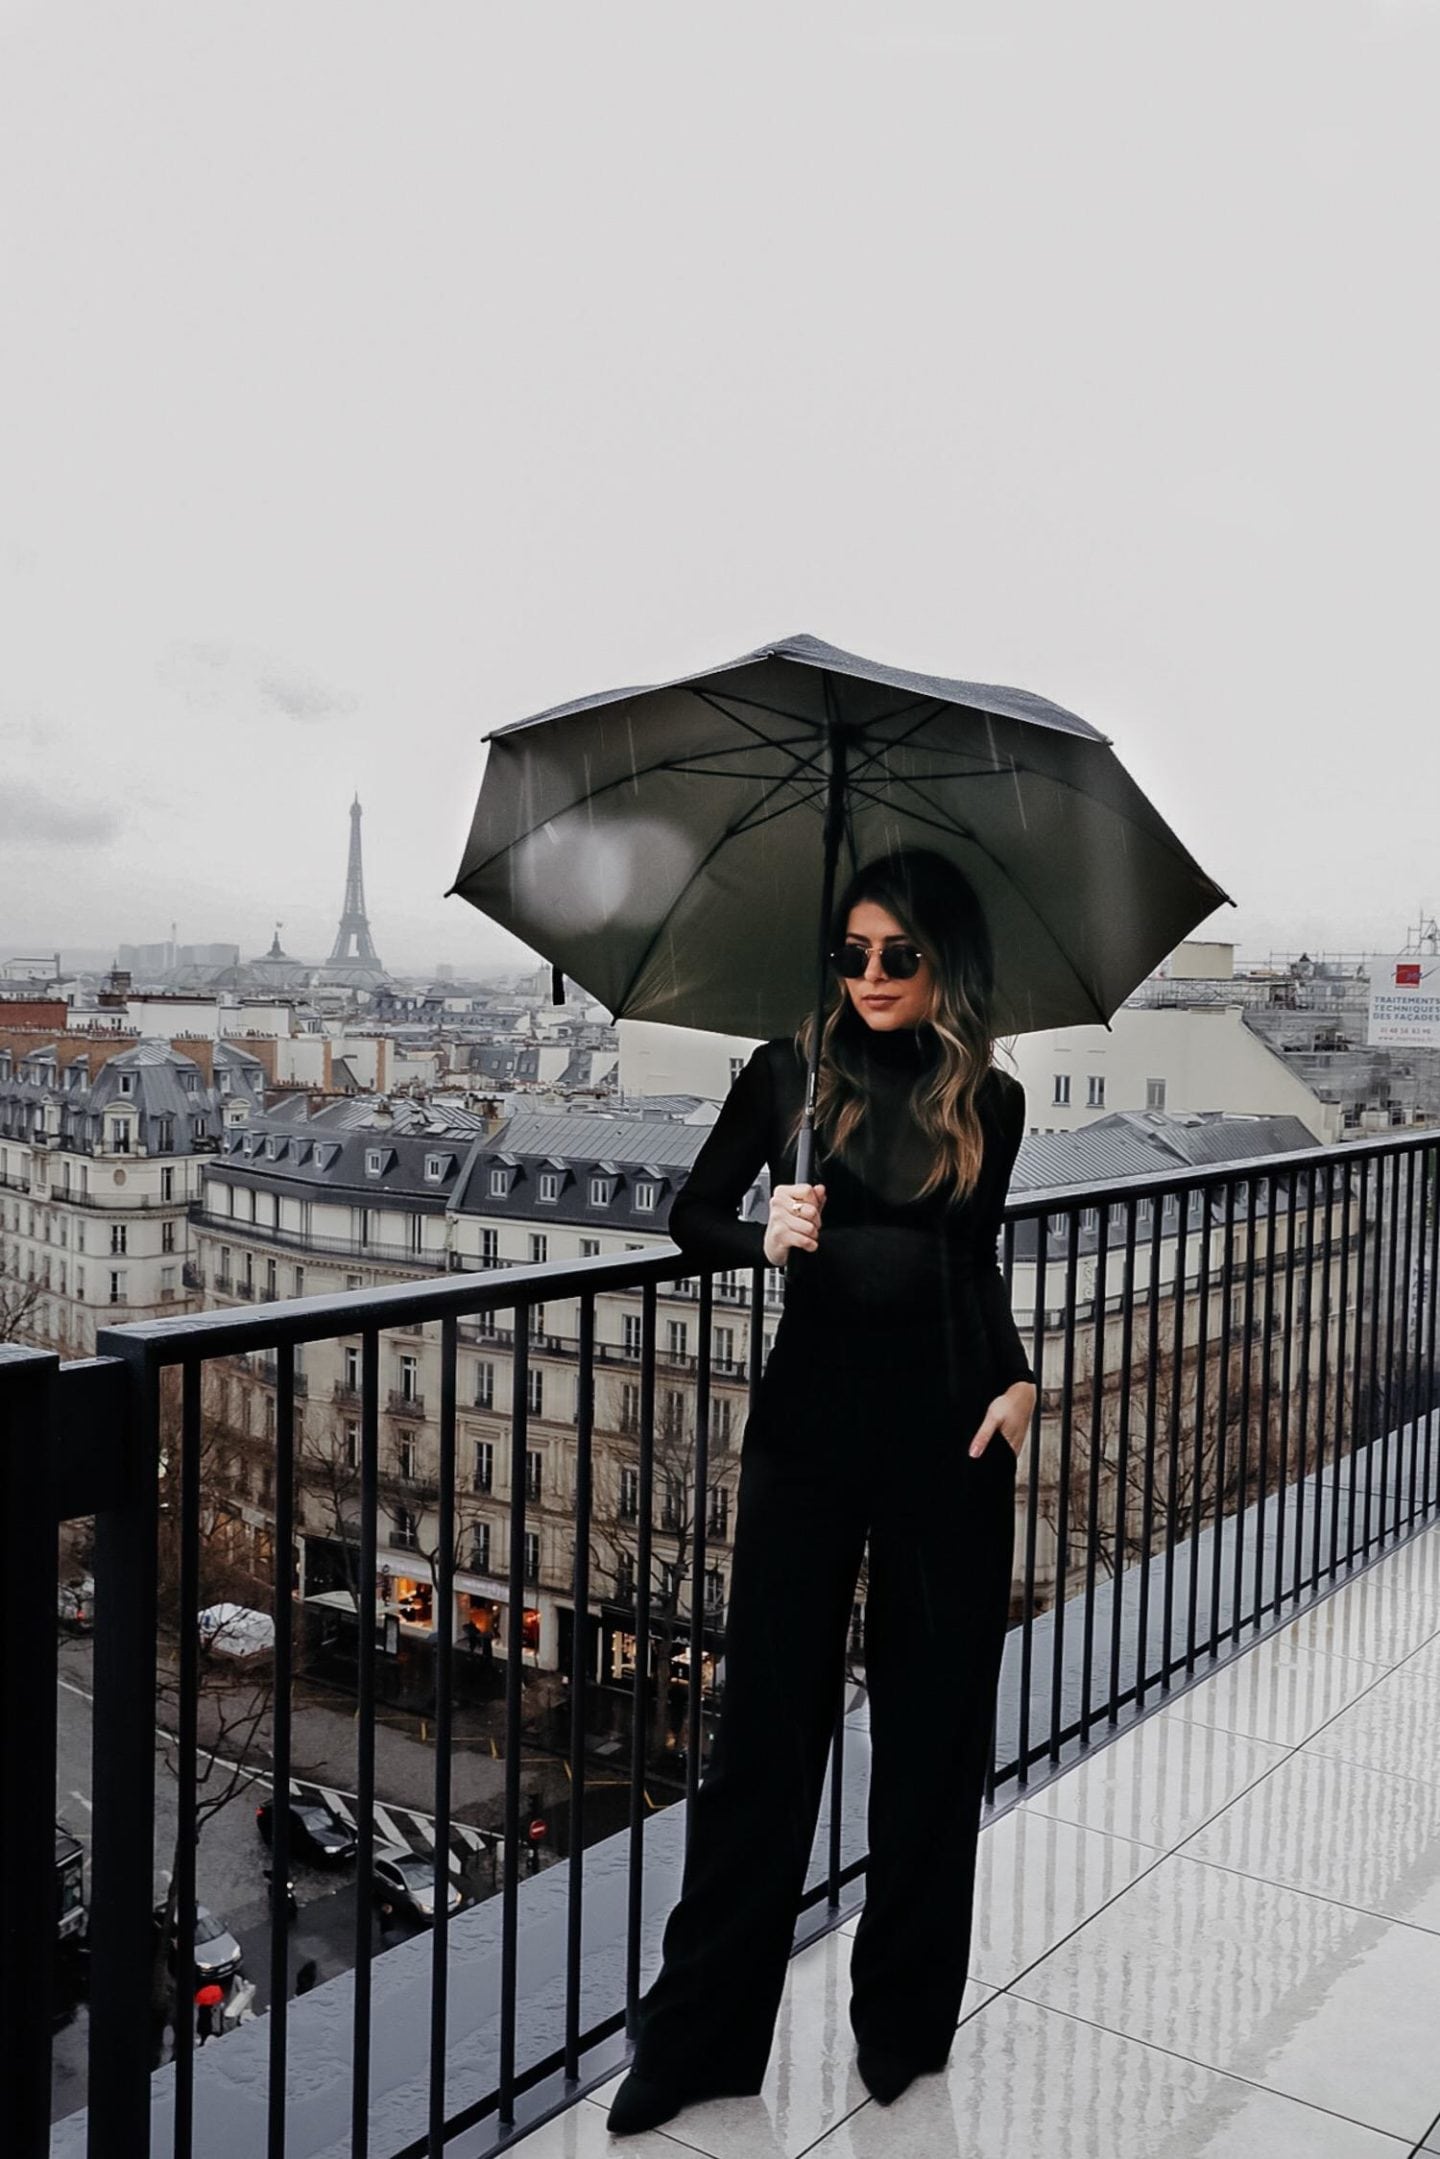 TheGirlFromPanama.com | Wear All Black With Confidence and Purpose | All Black Outfit in Paris, France